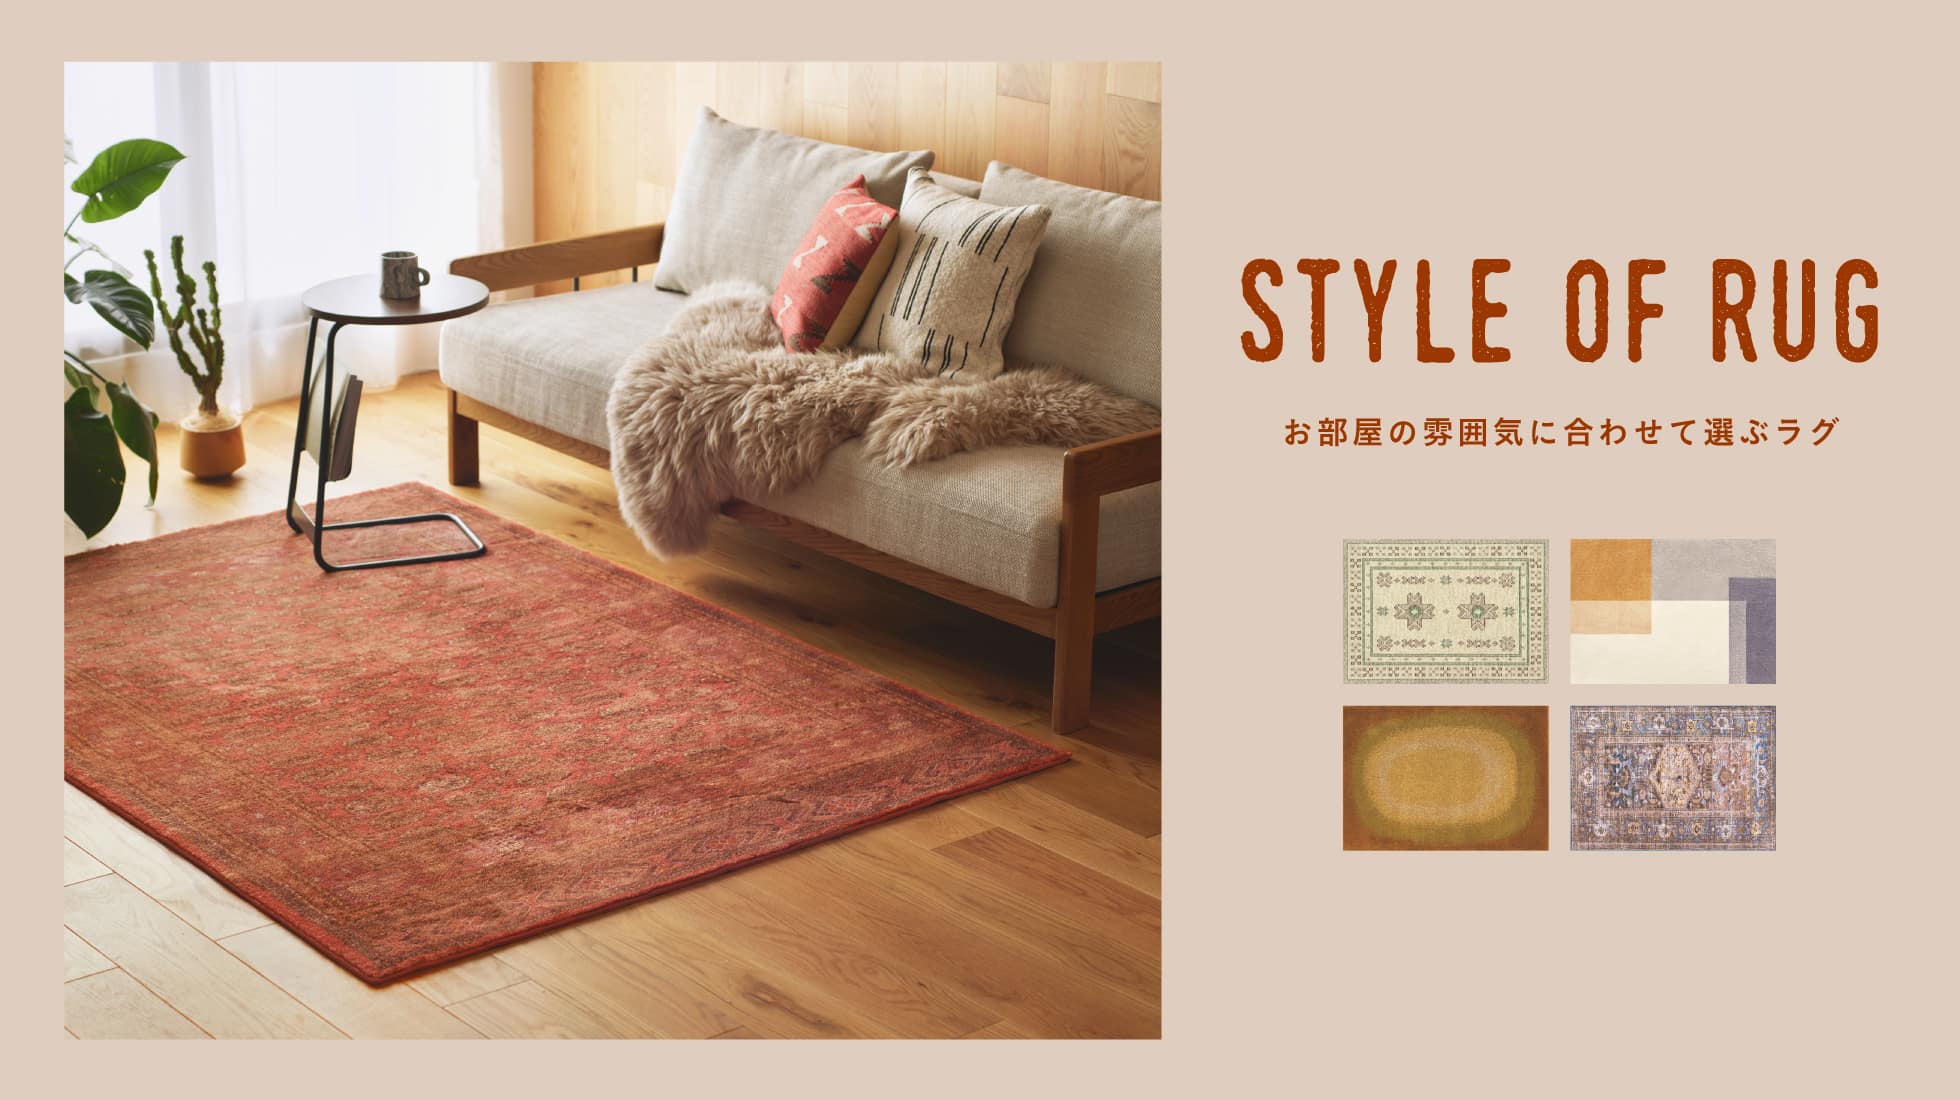 STYLE OF RUG